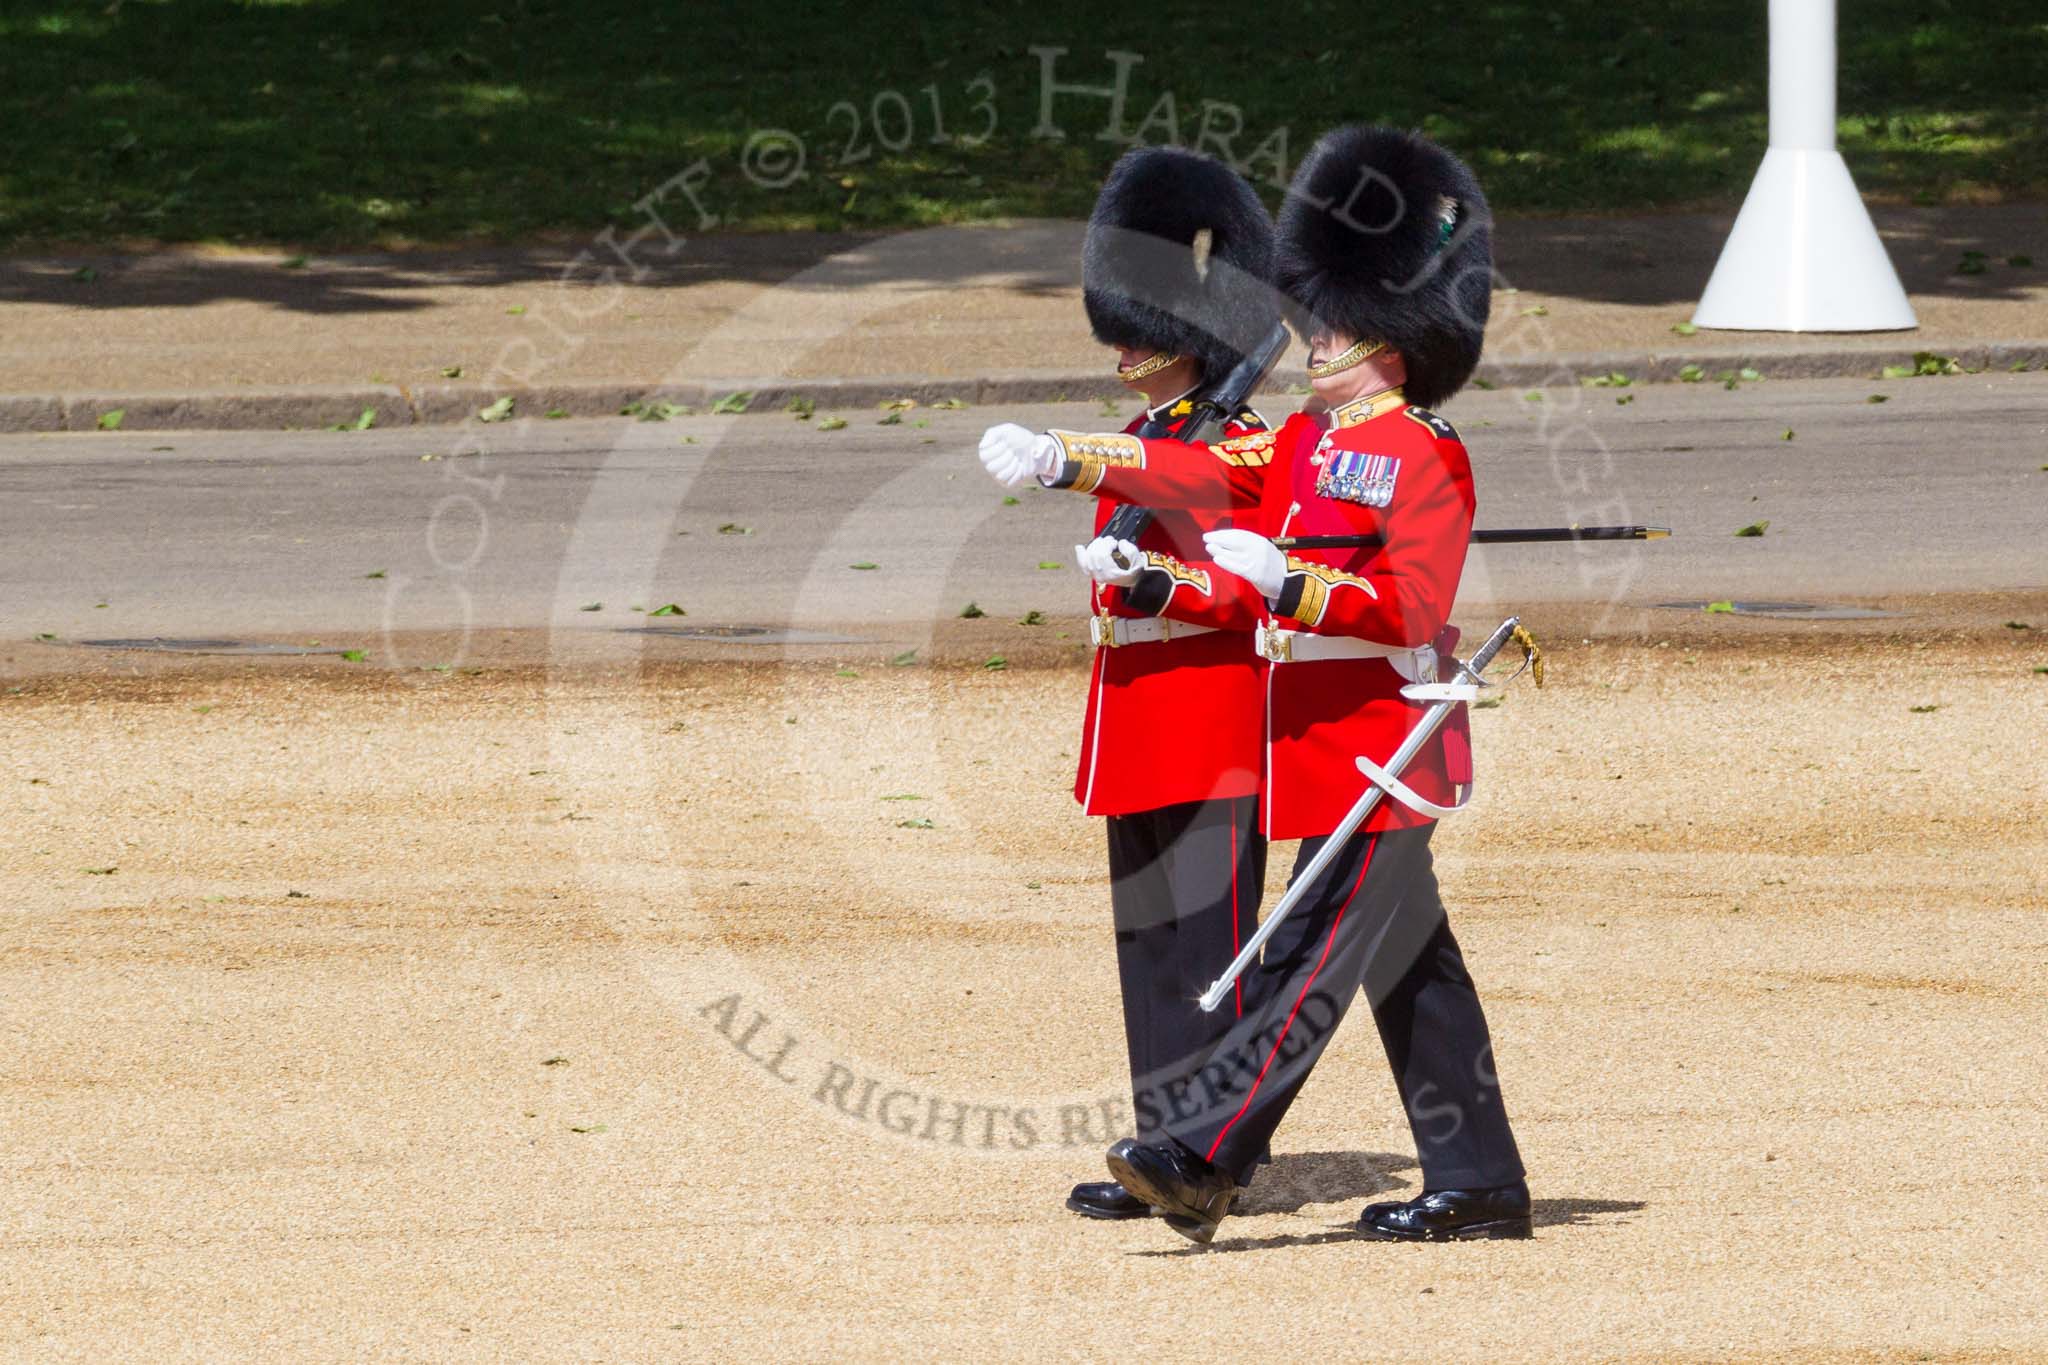 The Colonel's Review 2015.
Horse Guards Parade, Westminster,
London,

United Kingdom,
on 06 June 2015 at 10:19, image #43